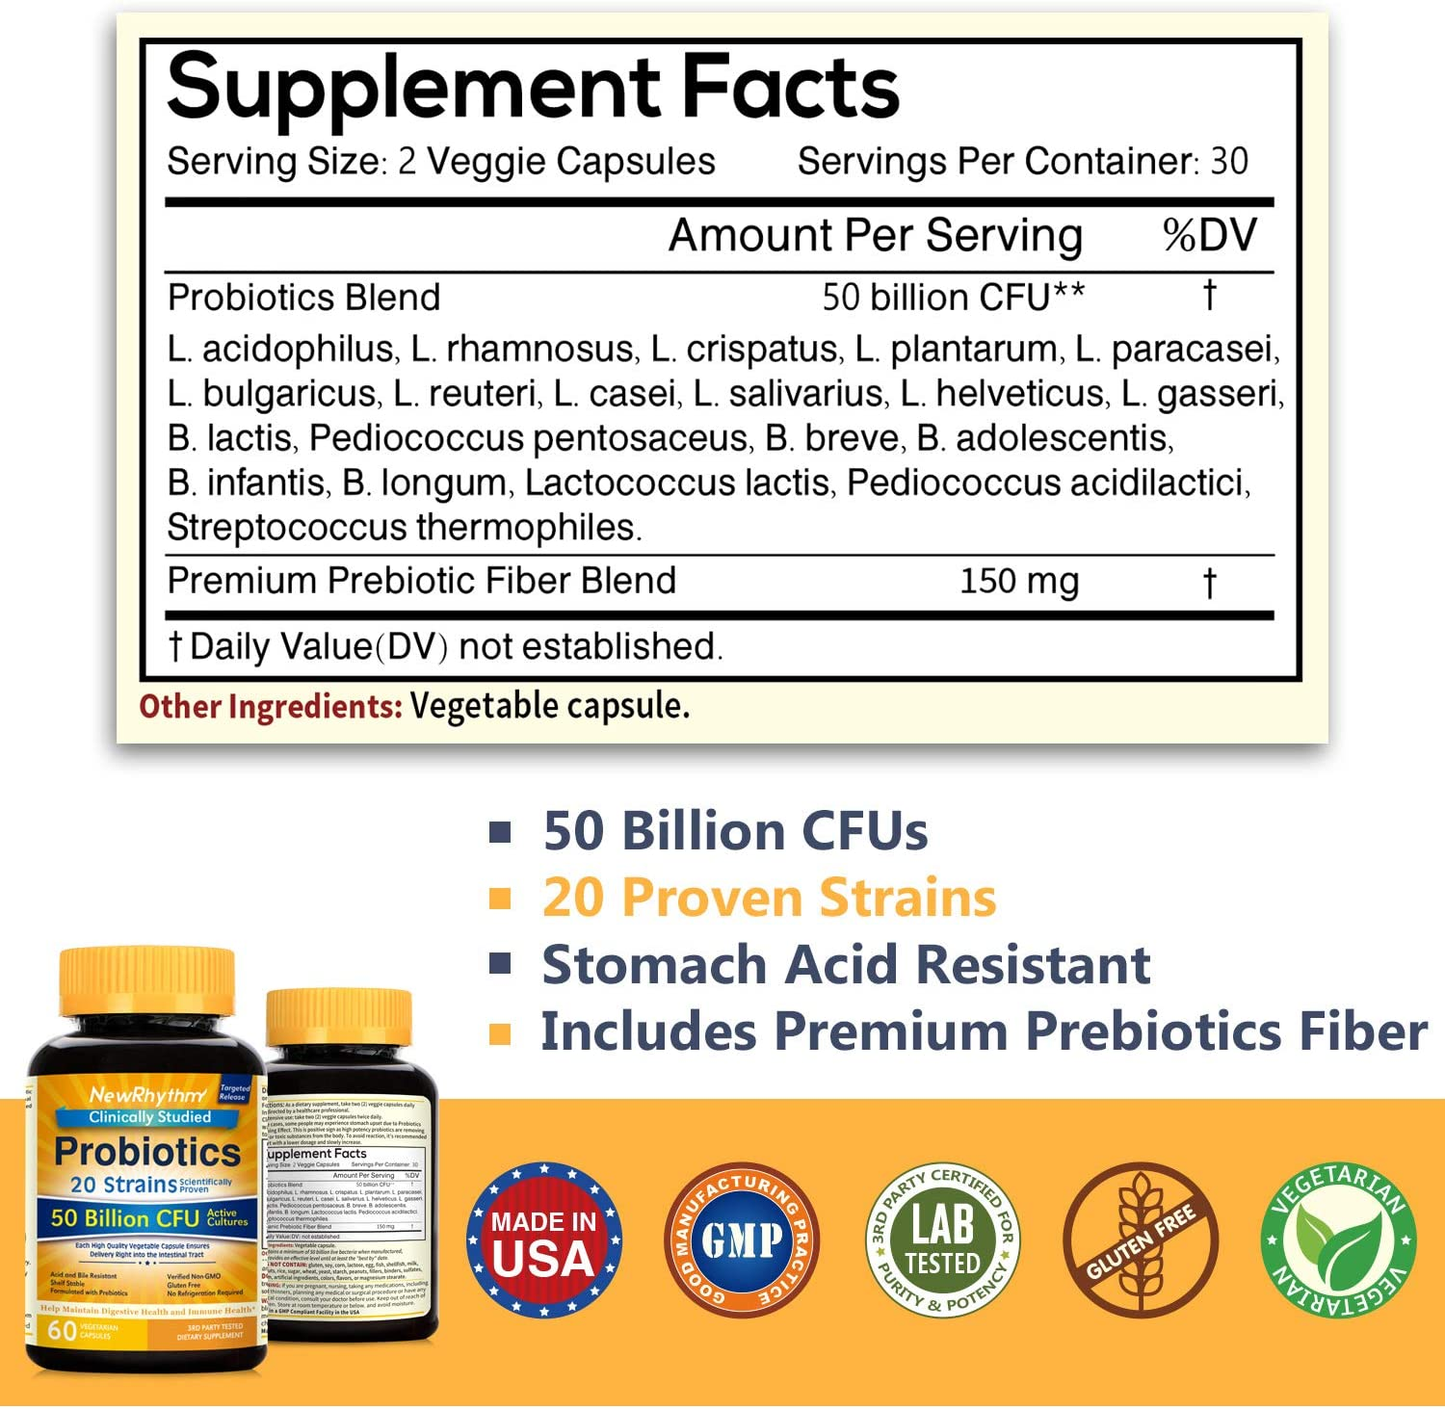 Probiotics 50 Billion CFU 20 Strains, 60 Veggie Capsules, Targeted Release Technology, Stomach Acid Resistant, No Need for Refrigeration, Non-Gmo, Gluten Free